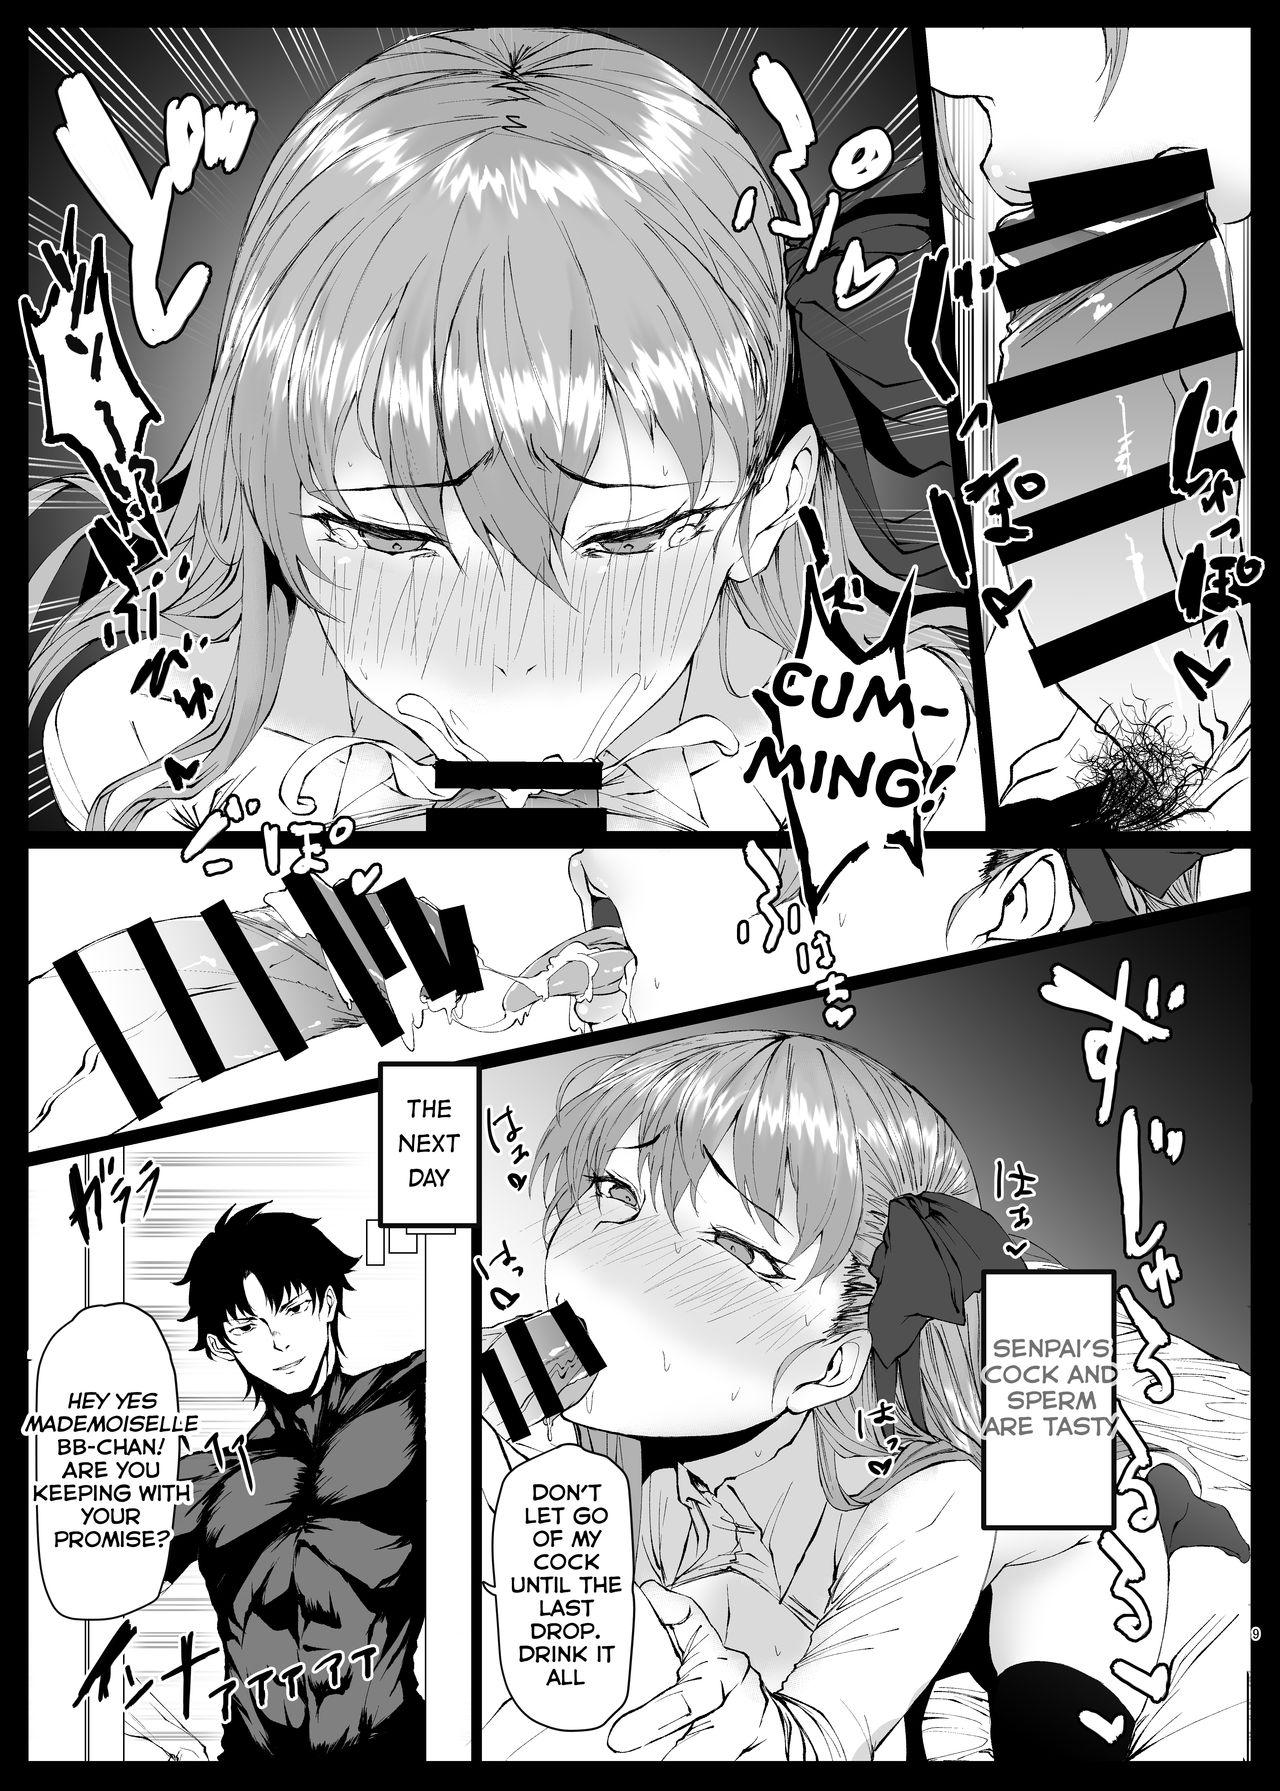 Ex Girlfriends VIOLATE A SANCTUARY 2 - Fate grand order Gaydudes - Page 9